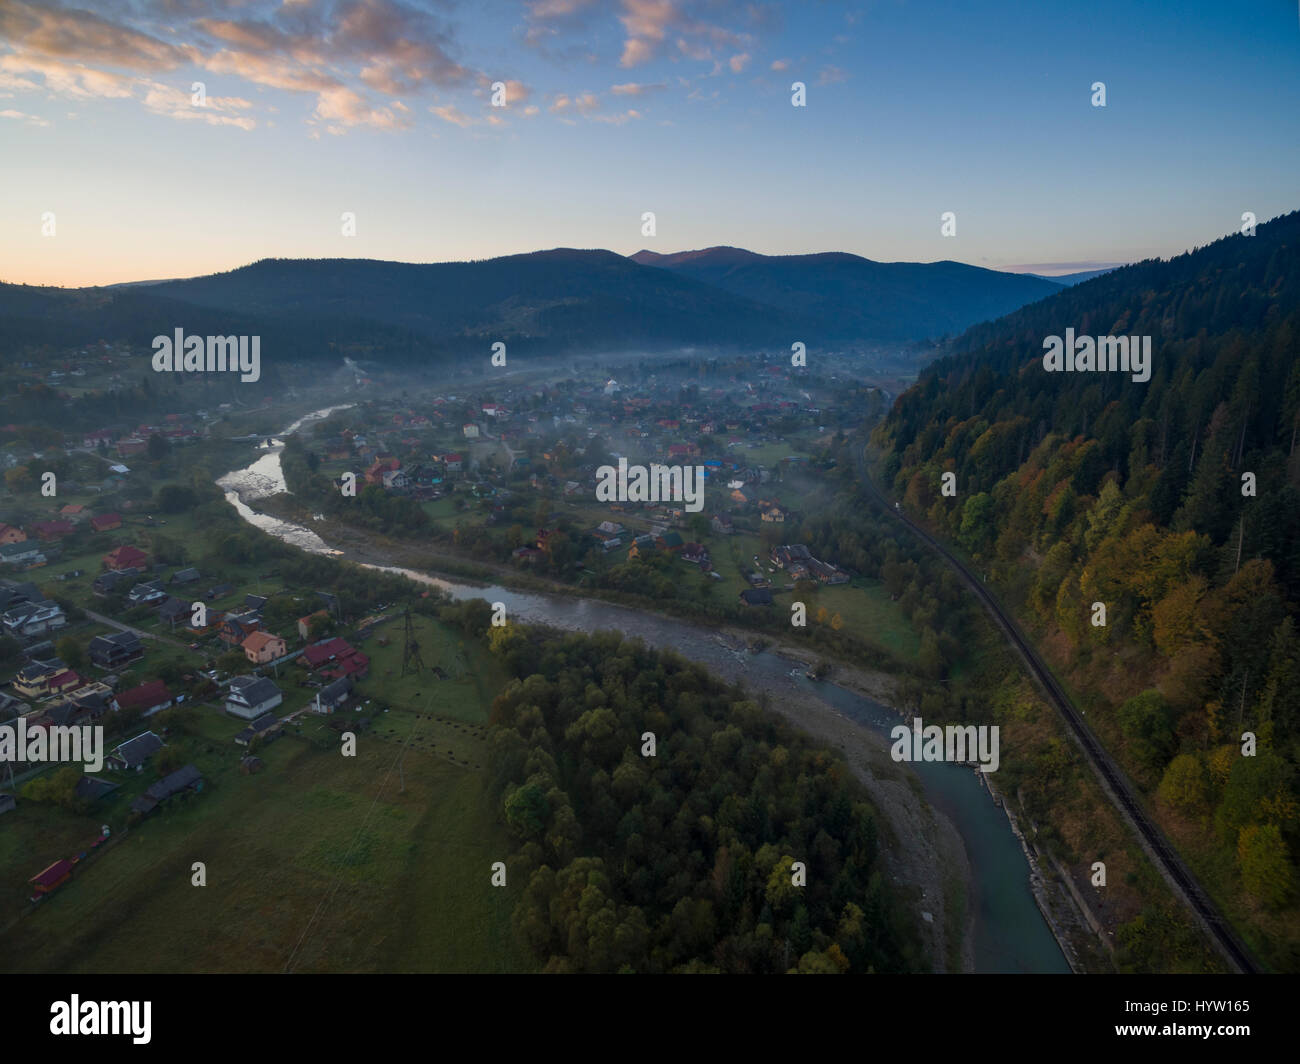 Aerial shot over the village of Mykulychyn in the Carpathian region of Western Ukraine as the sun rises behind distant mountains Stock Photo